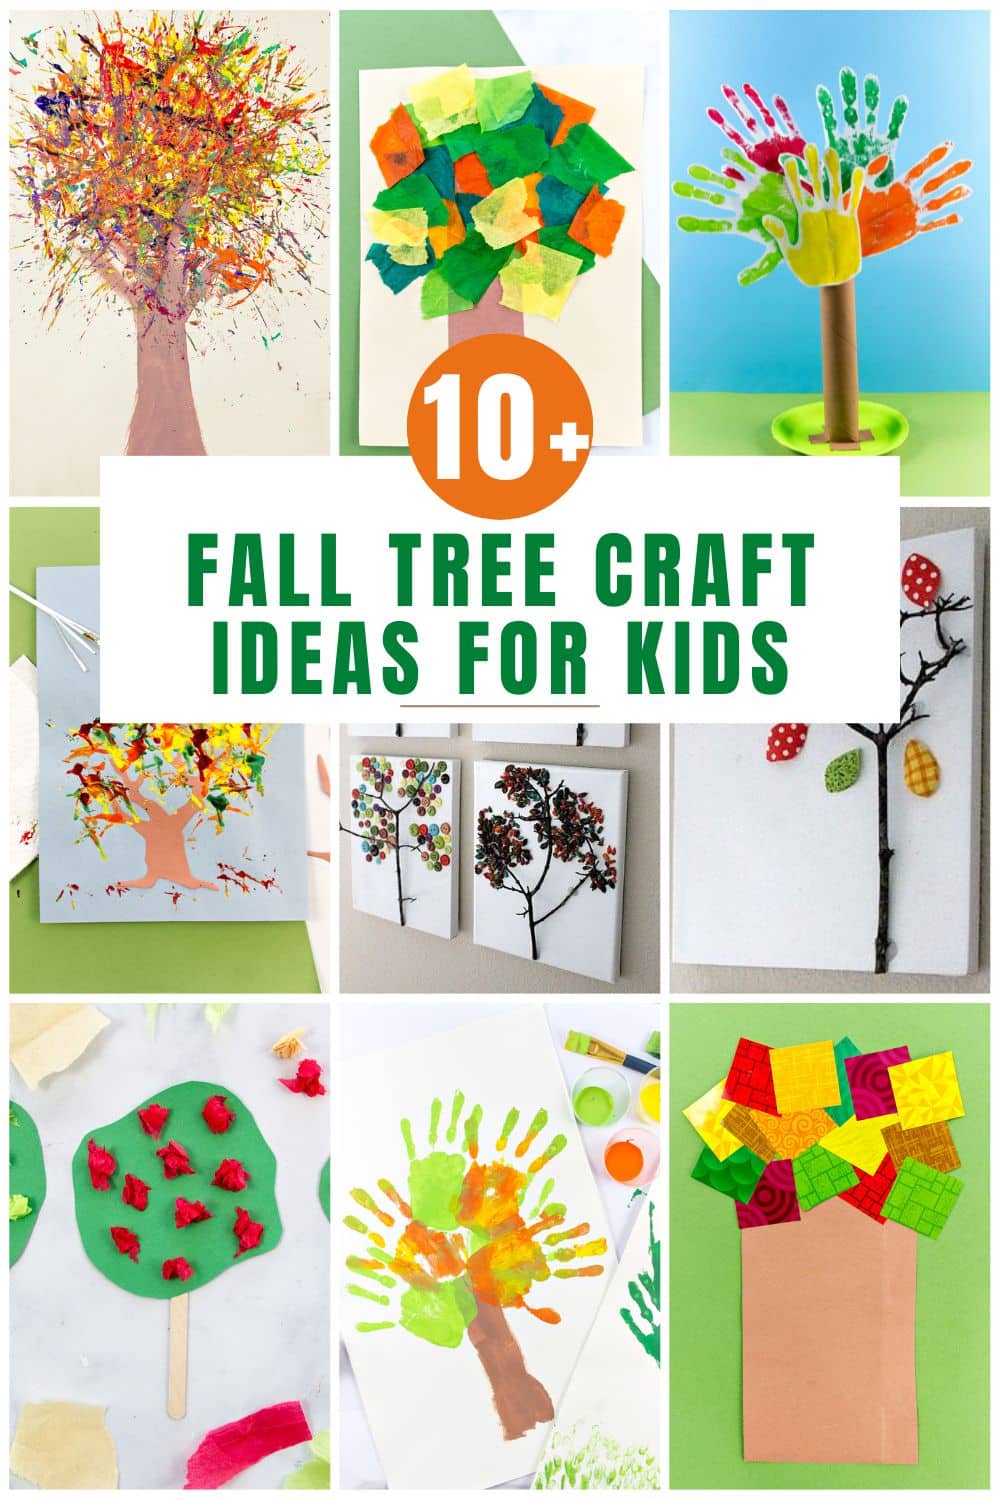 9 fall tree craft ideas for kids pinterest image